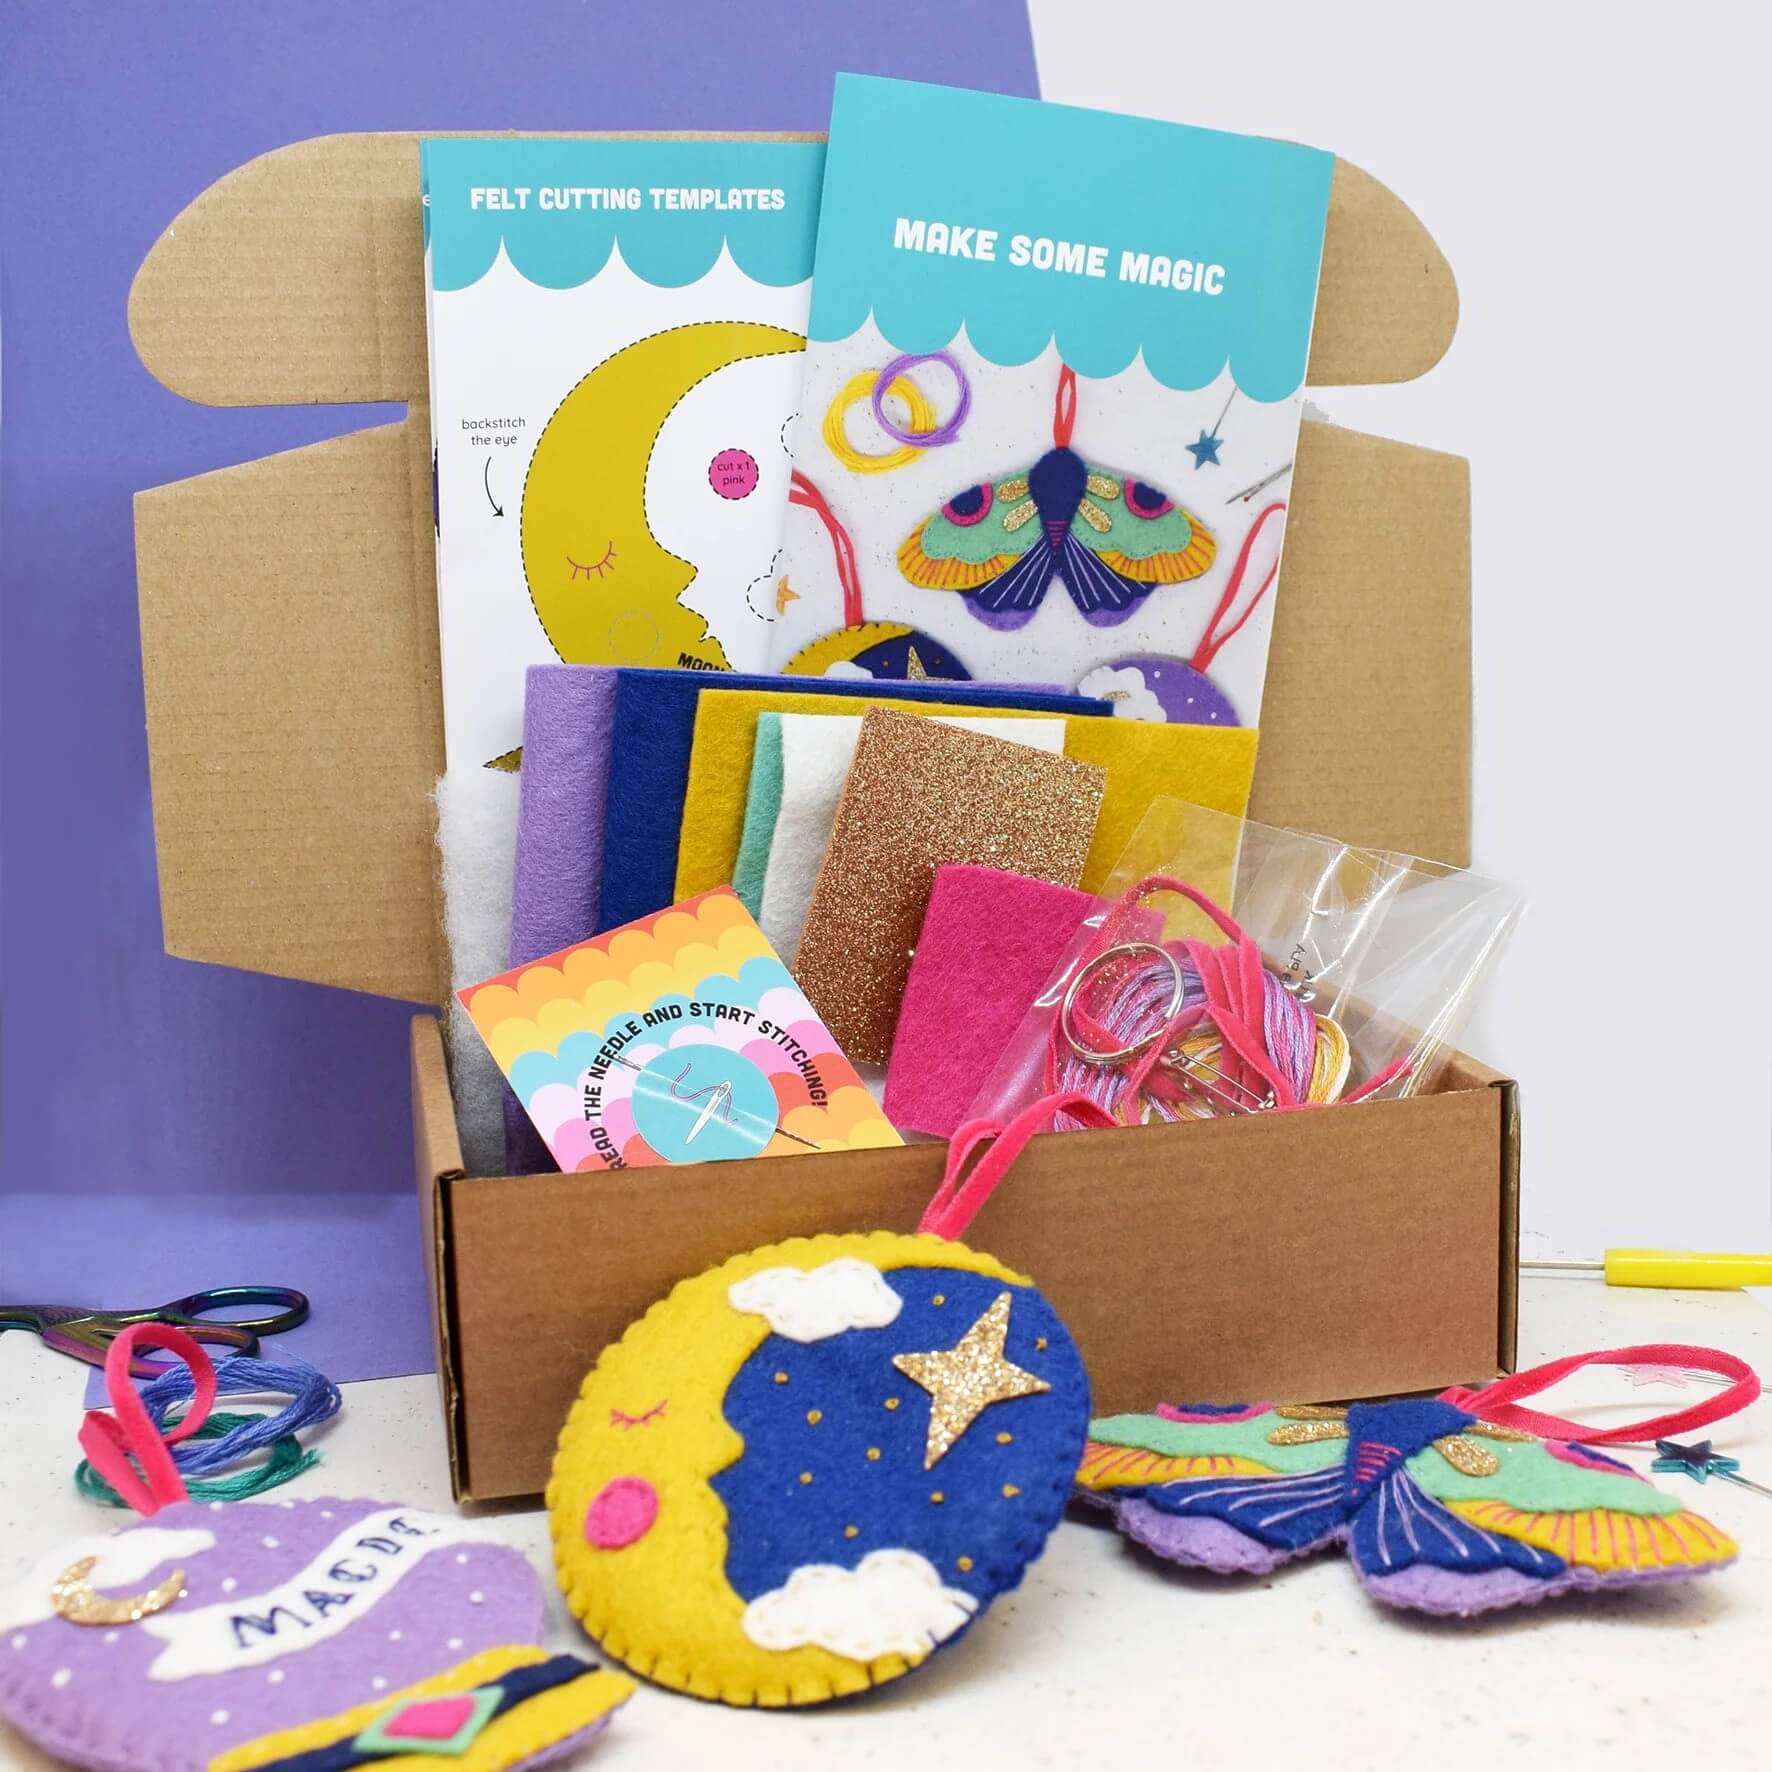 Box with contents of The Make Arcade Magic felt sewing craft kit with instructions